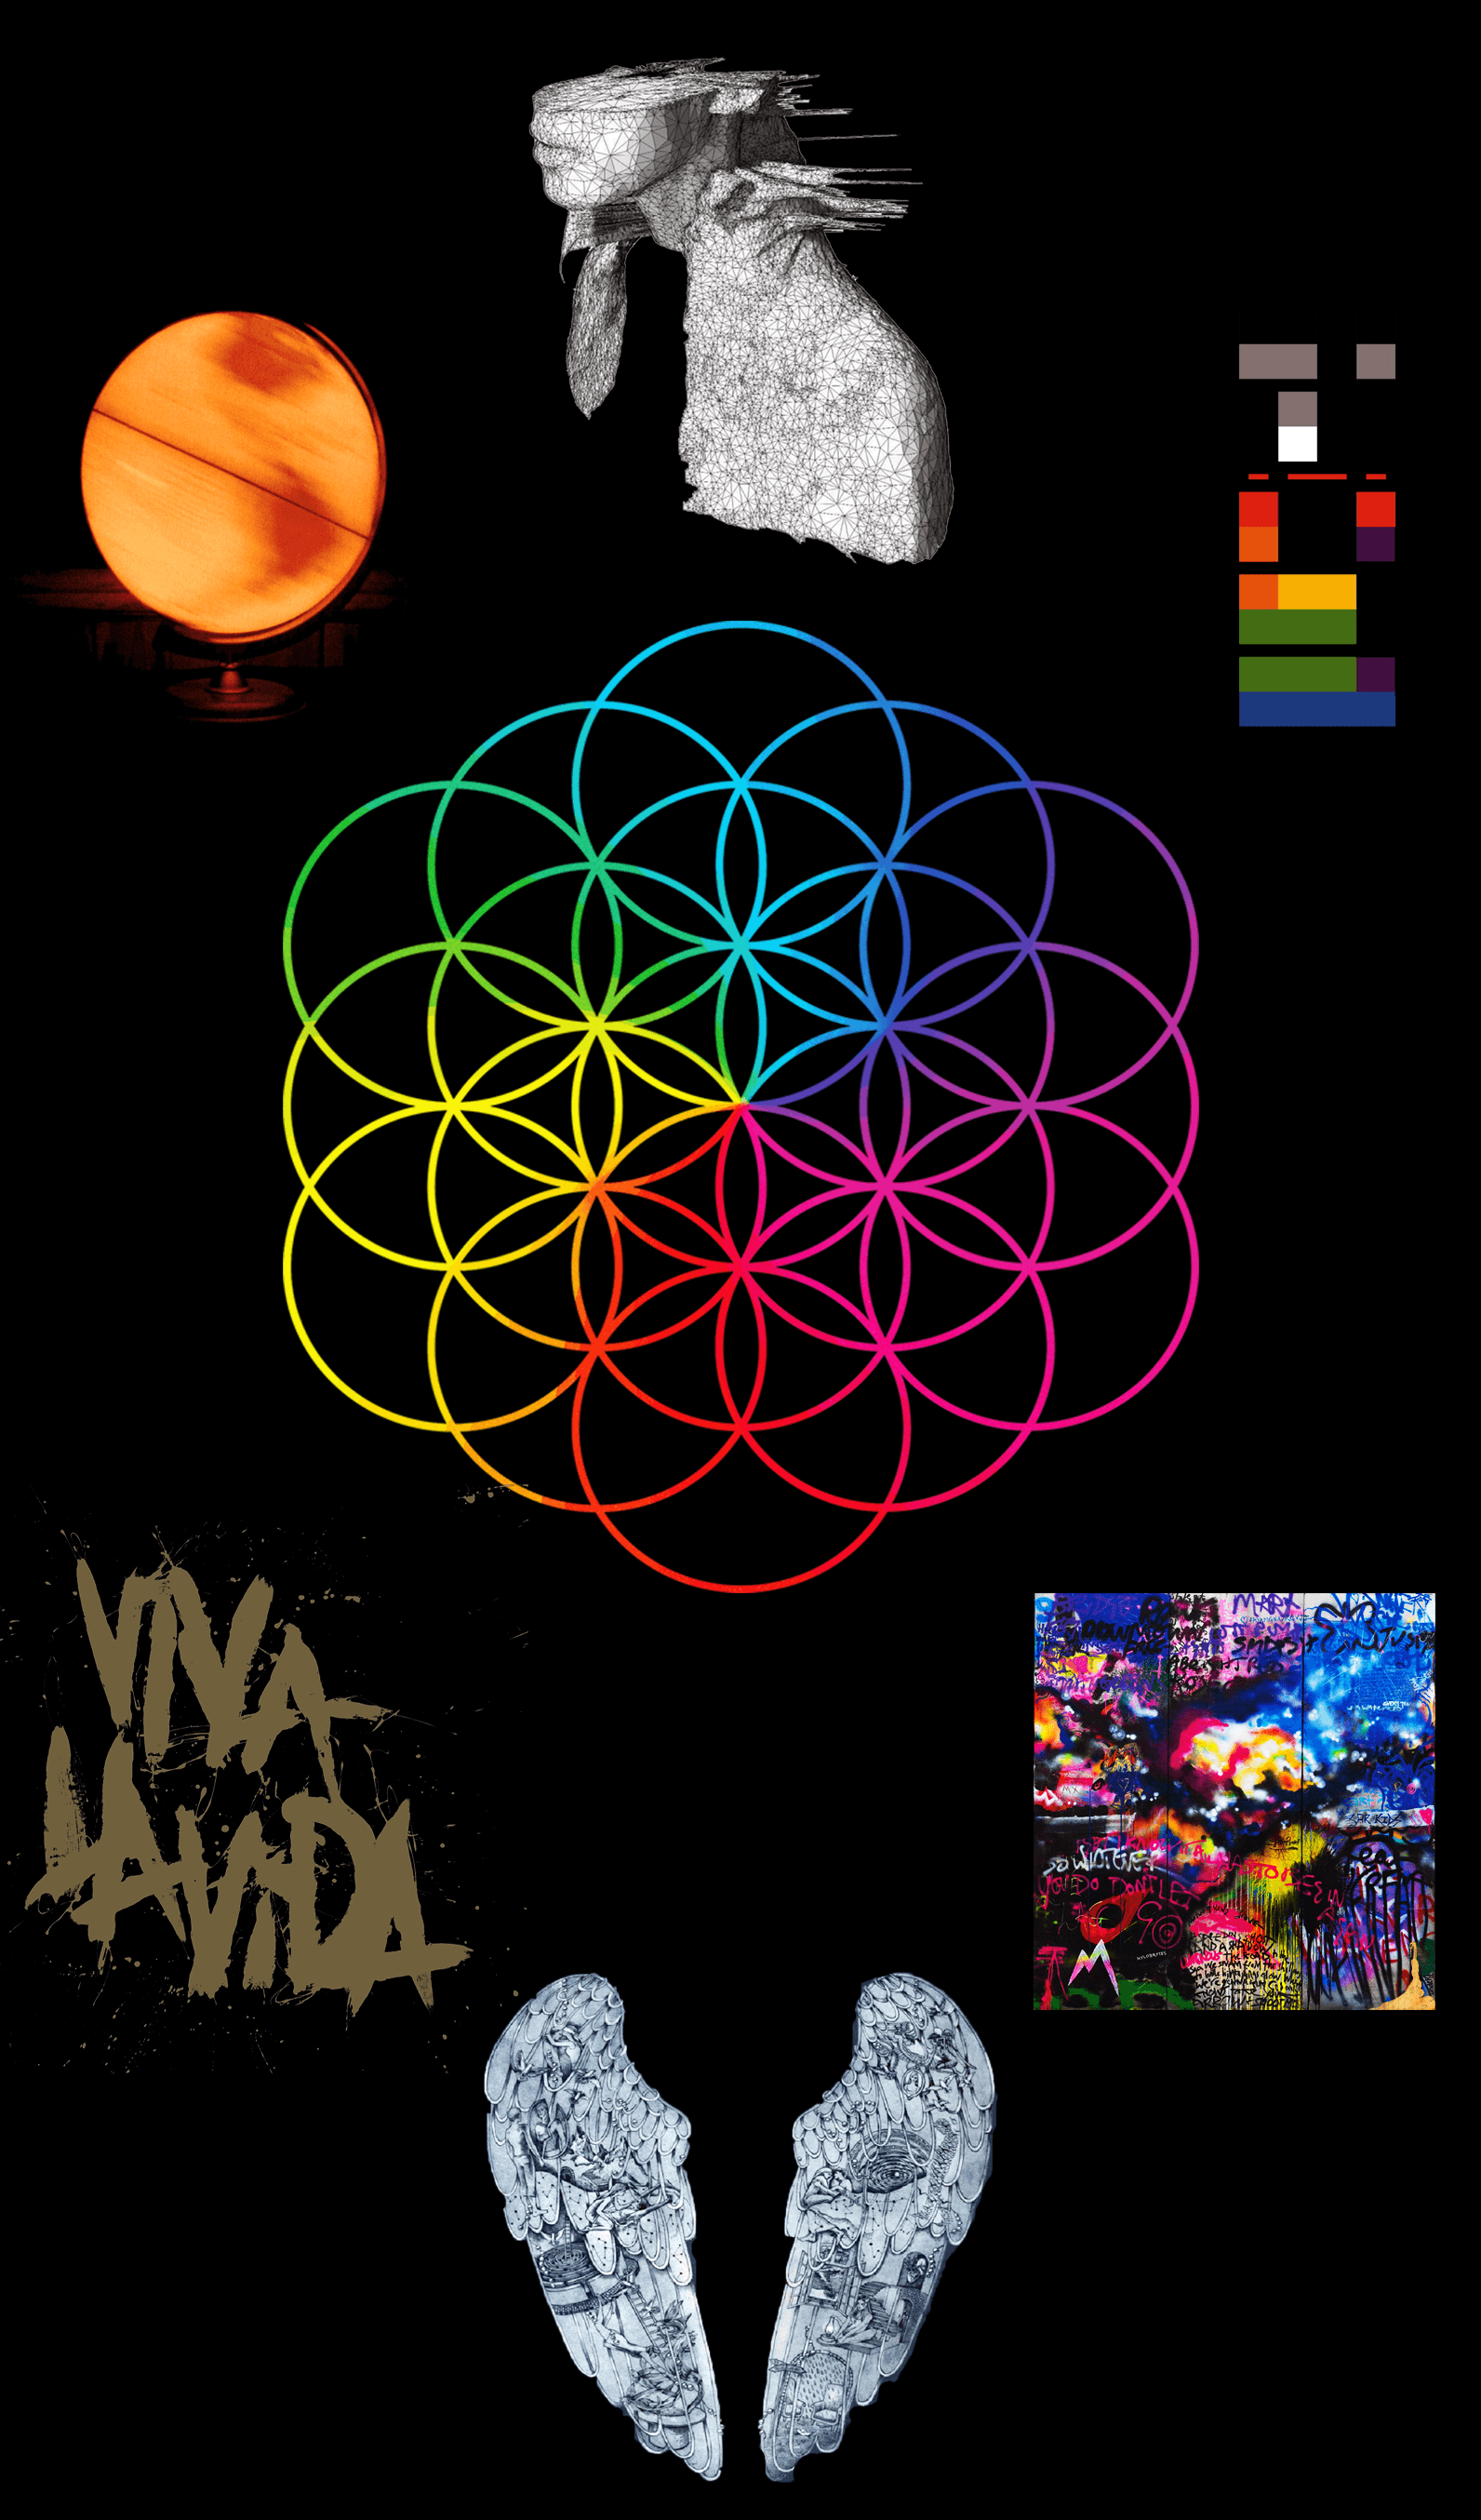 Show us your Coldplay related art. Coldplay